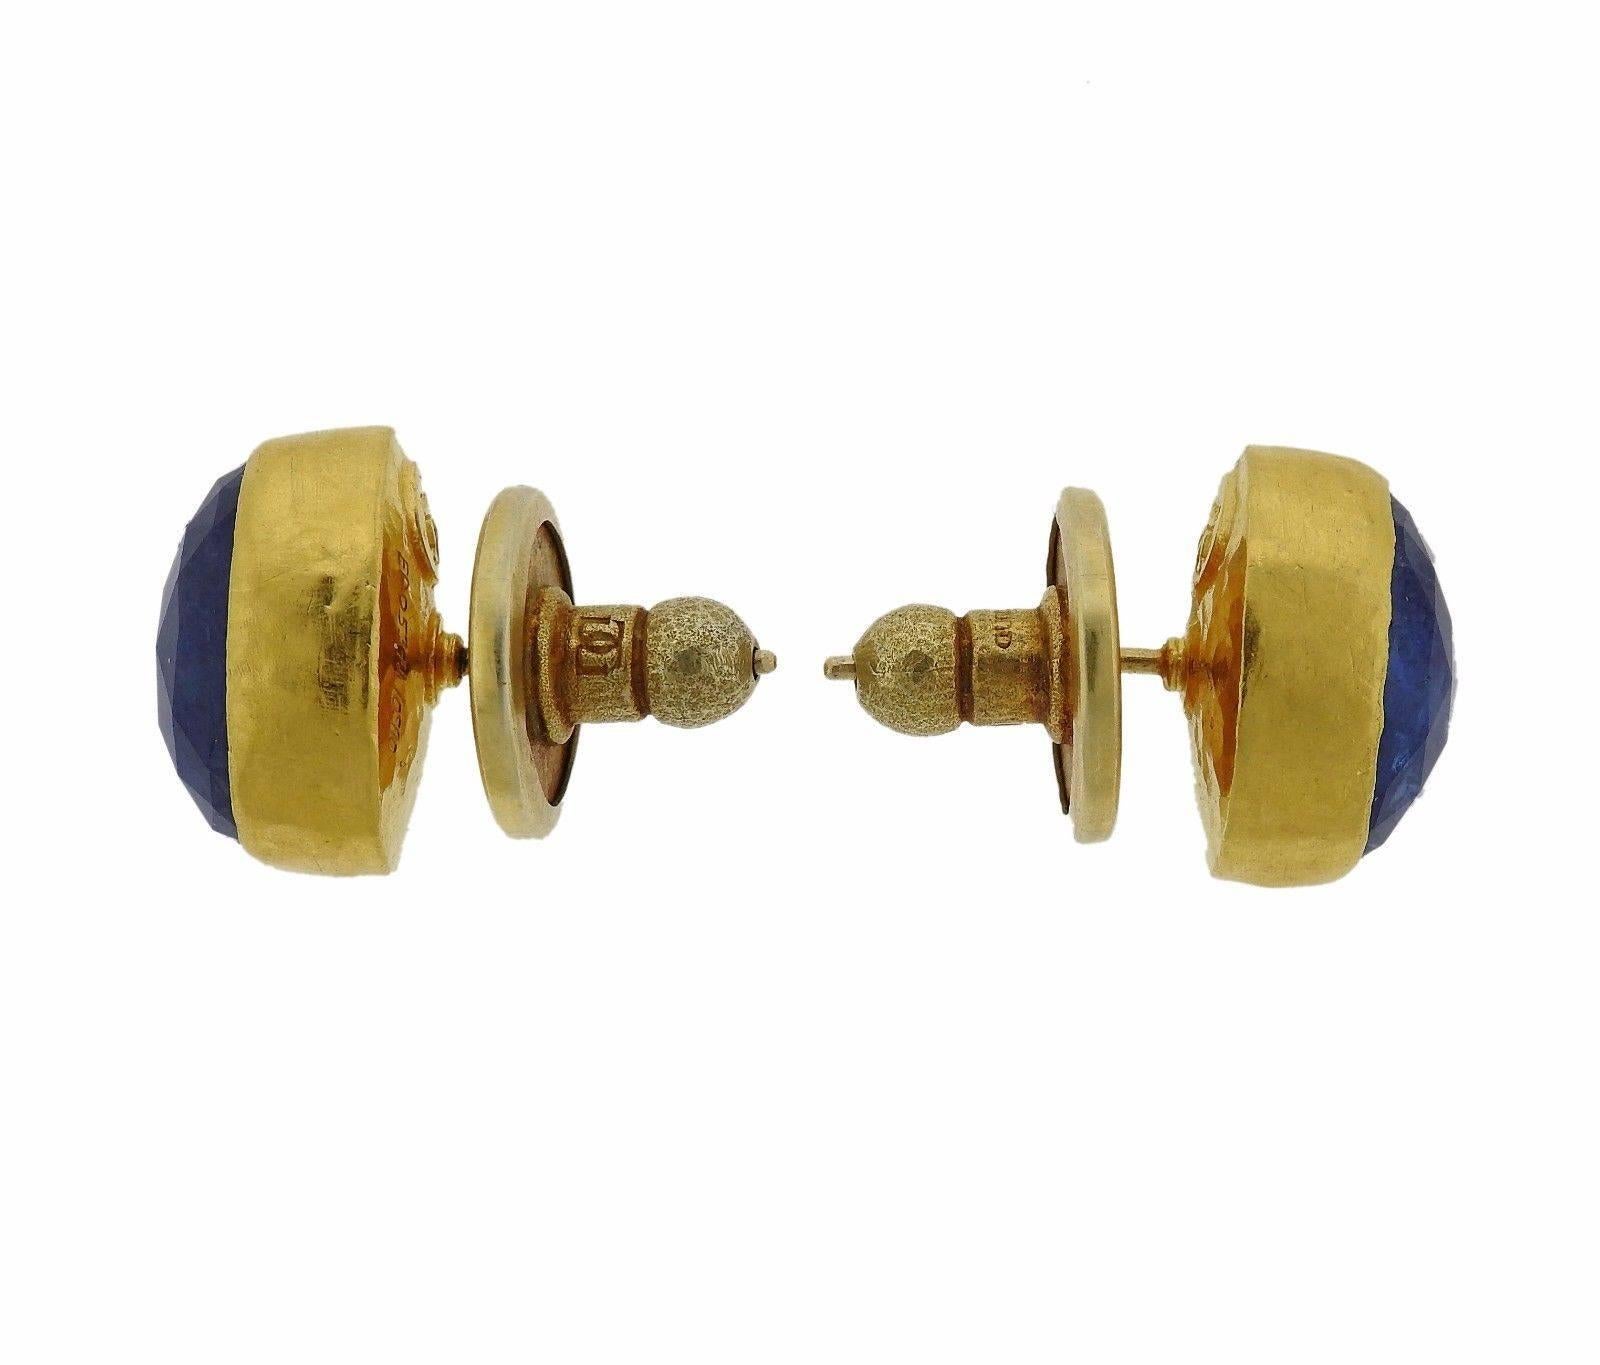 A pair of 24k gold earrings set with sapphires.  The earrings measure 14.5mm x 11mm and weigh 12 grams. Marked: Gurhan, EA05374/0.990.  The earrings retail for $6250.  Earrings come with Gurhan pouch.